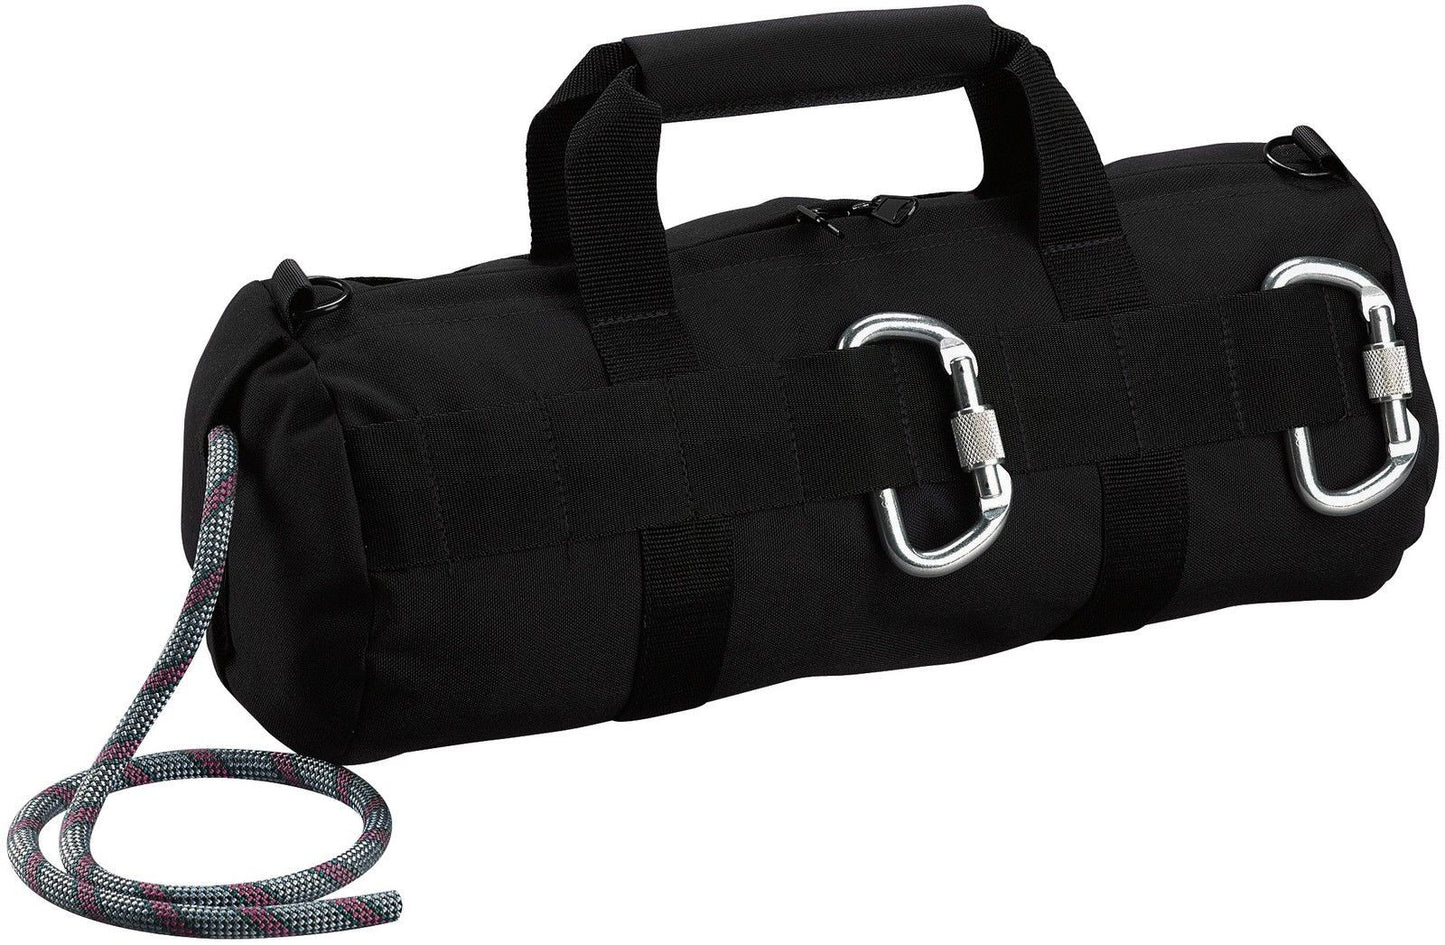 Professional Black Stealth Rappelling Bag - Great For Climbing & Caving, SWAT